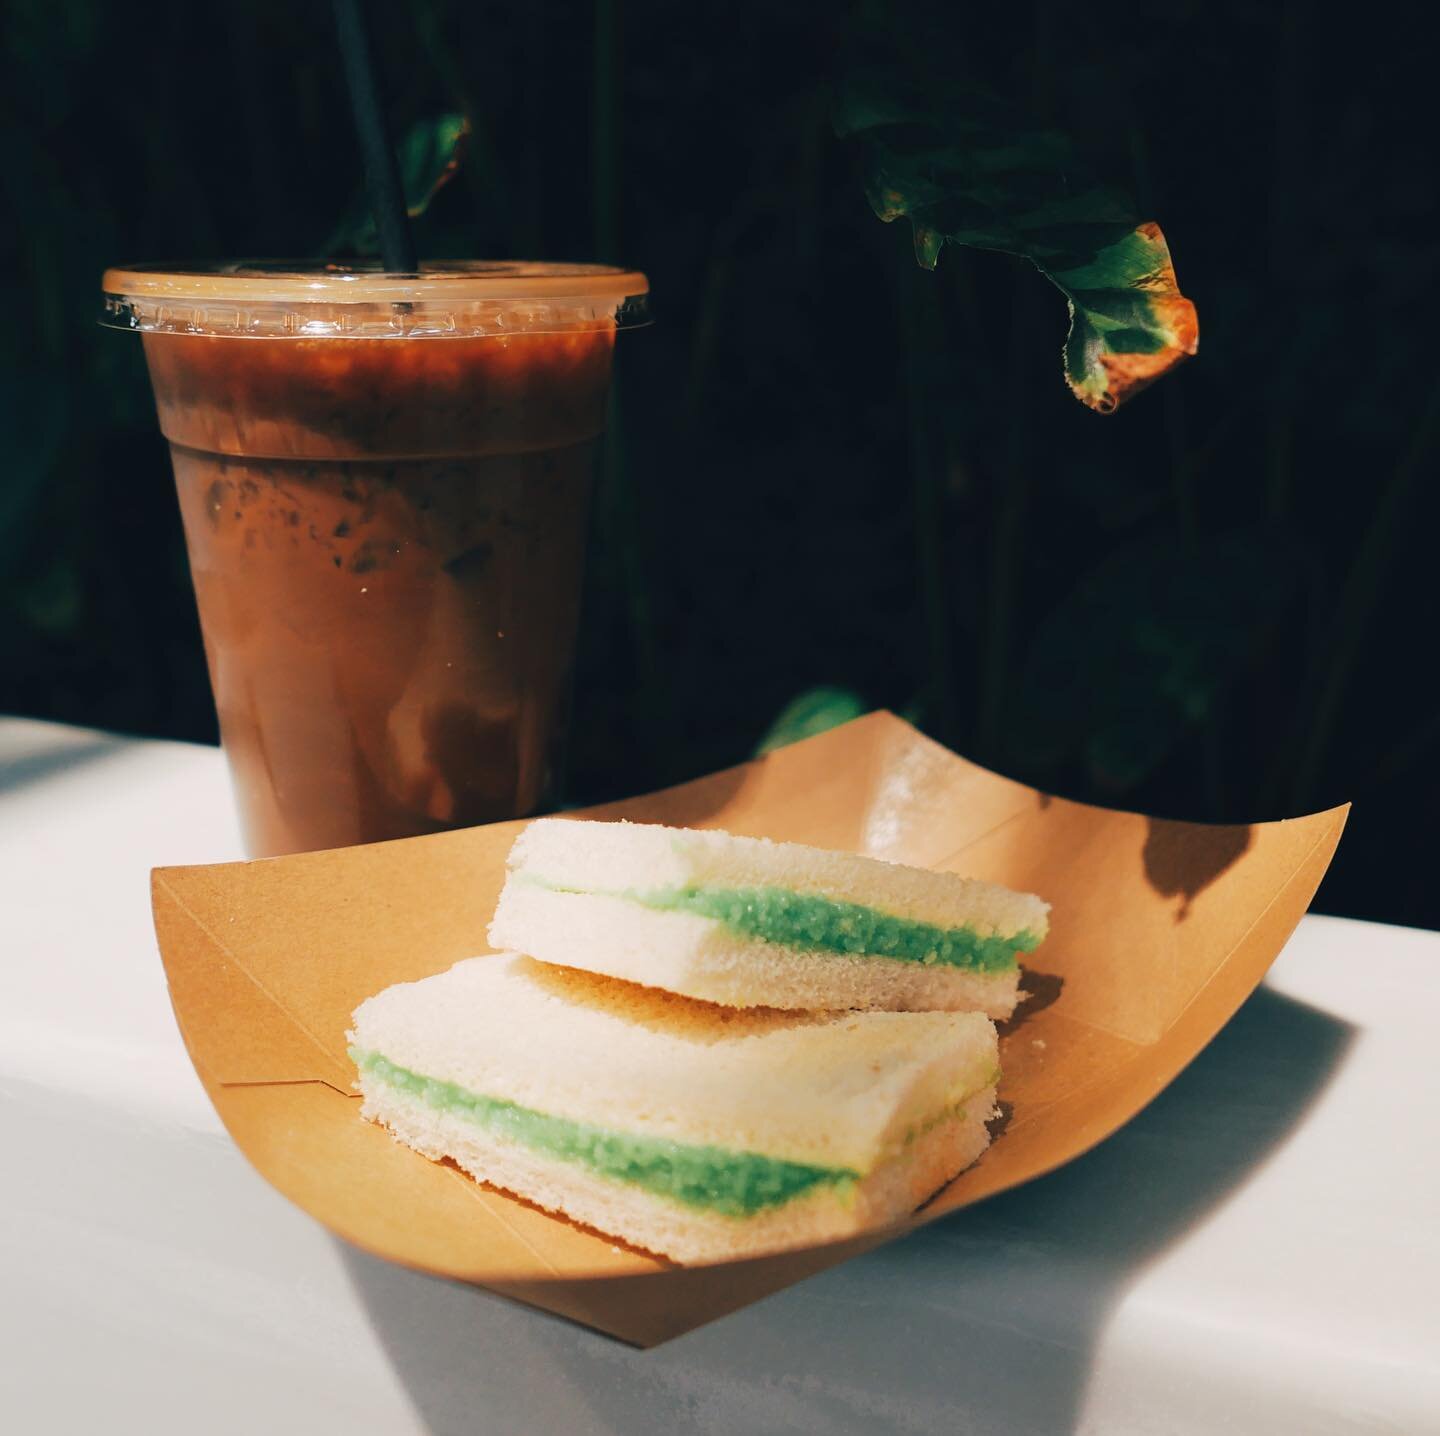 May is our Test Kitchen month at Shiok Express! Starting today, we&rsquo;ll be featuring Kopi and Kaya Toast at our @thecityoflougheed location during weekdays, so check it out and let us know what you think!